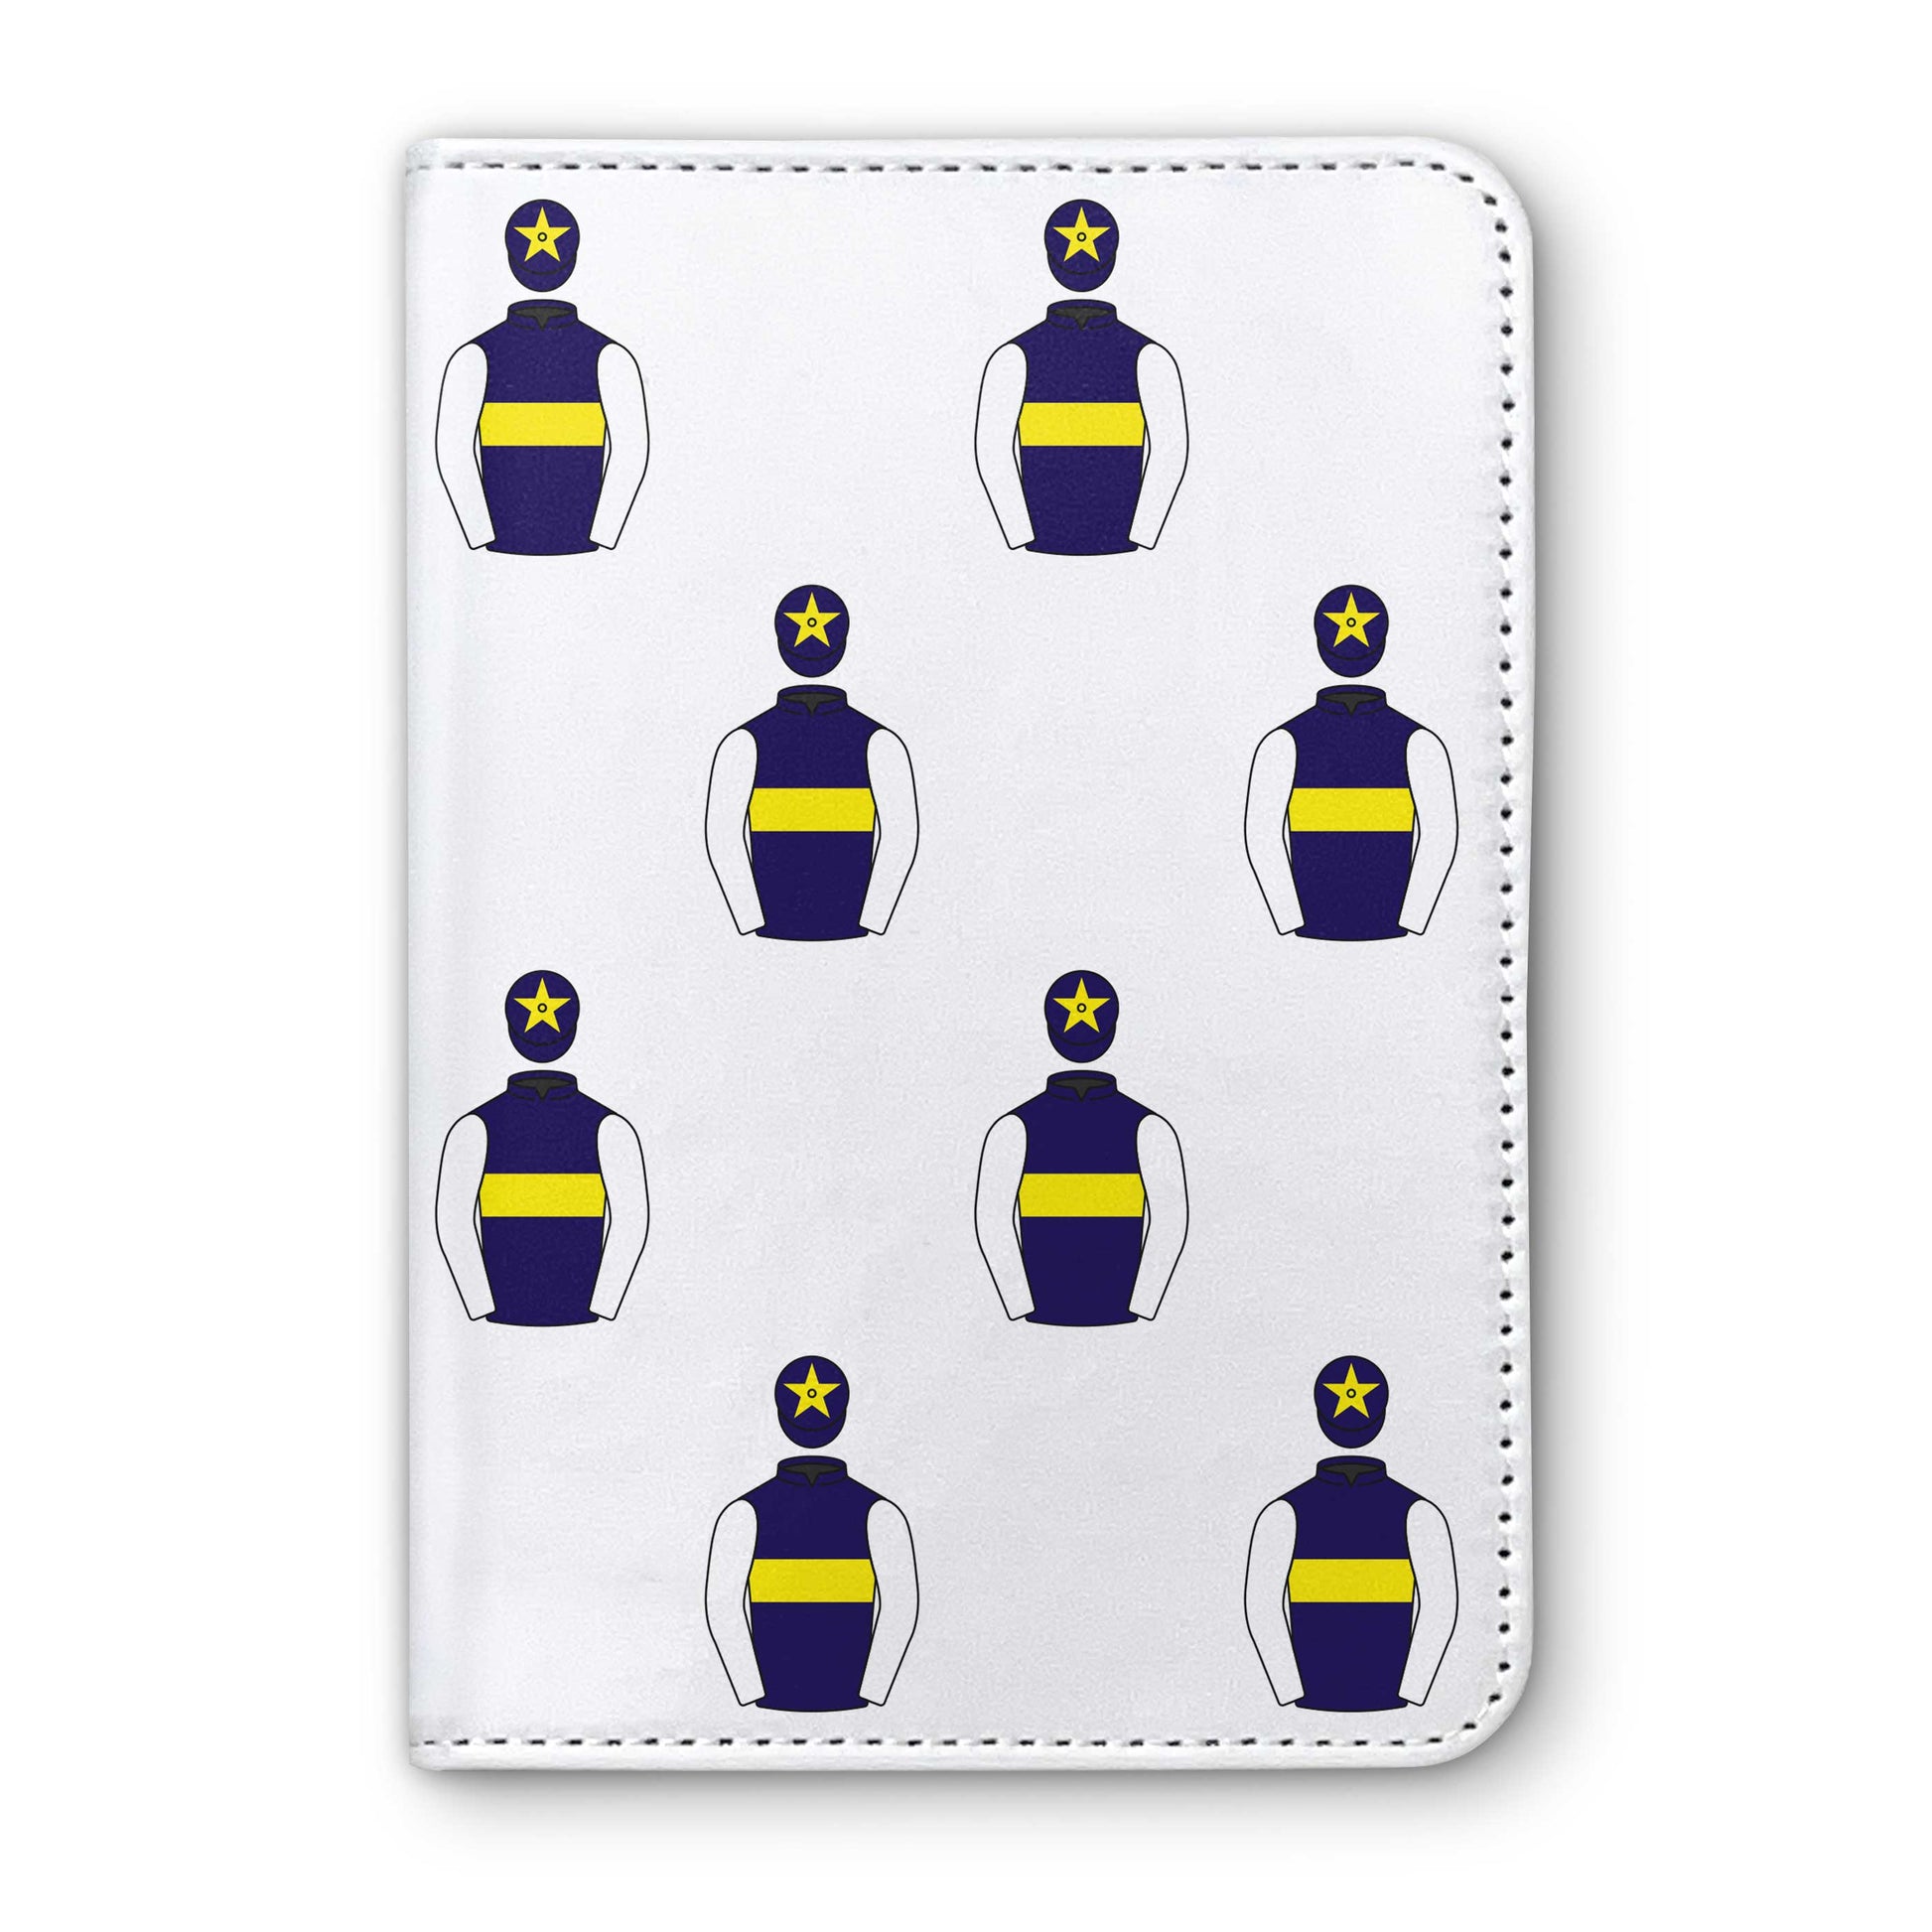 Bruton Street V Horse Racing Passport Holder - Hacked Up Horse Racing Gifts